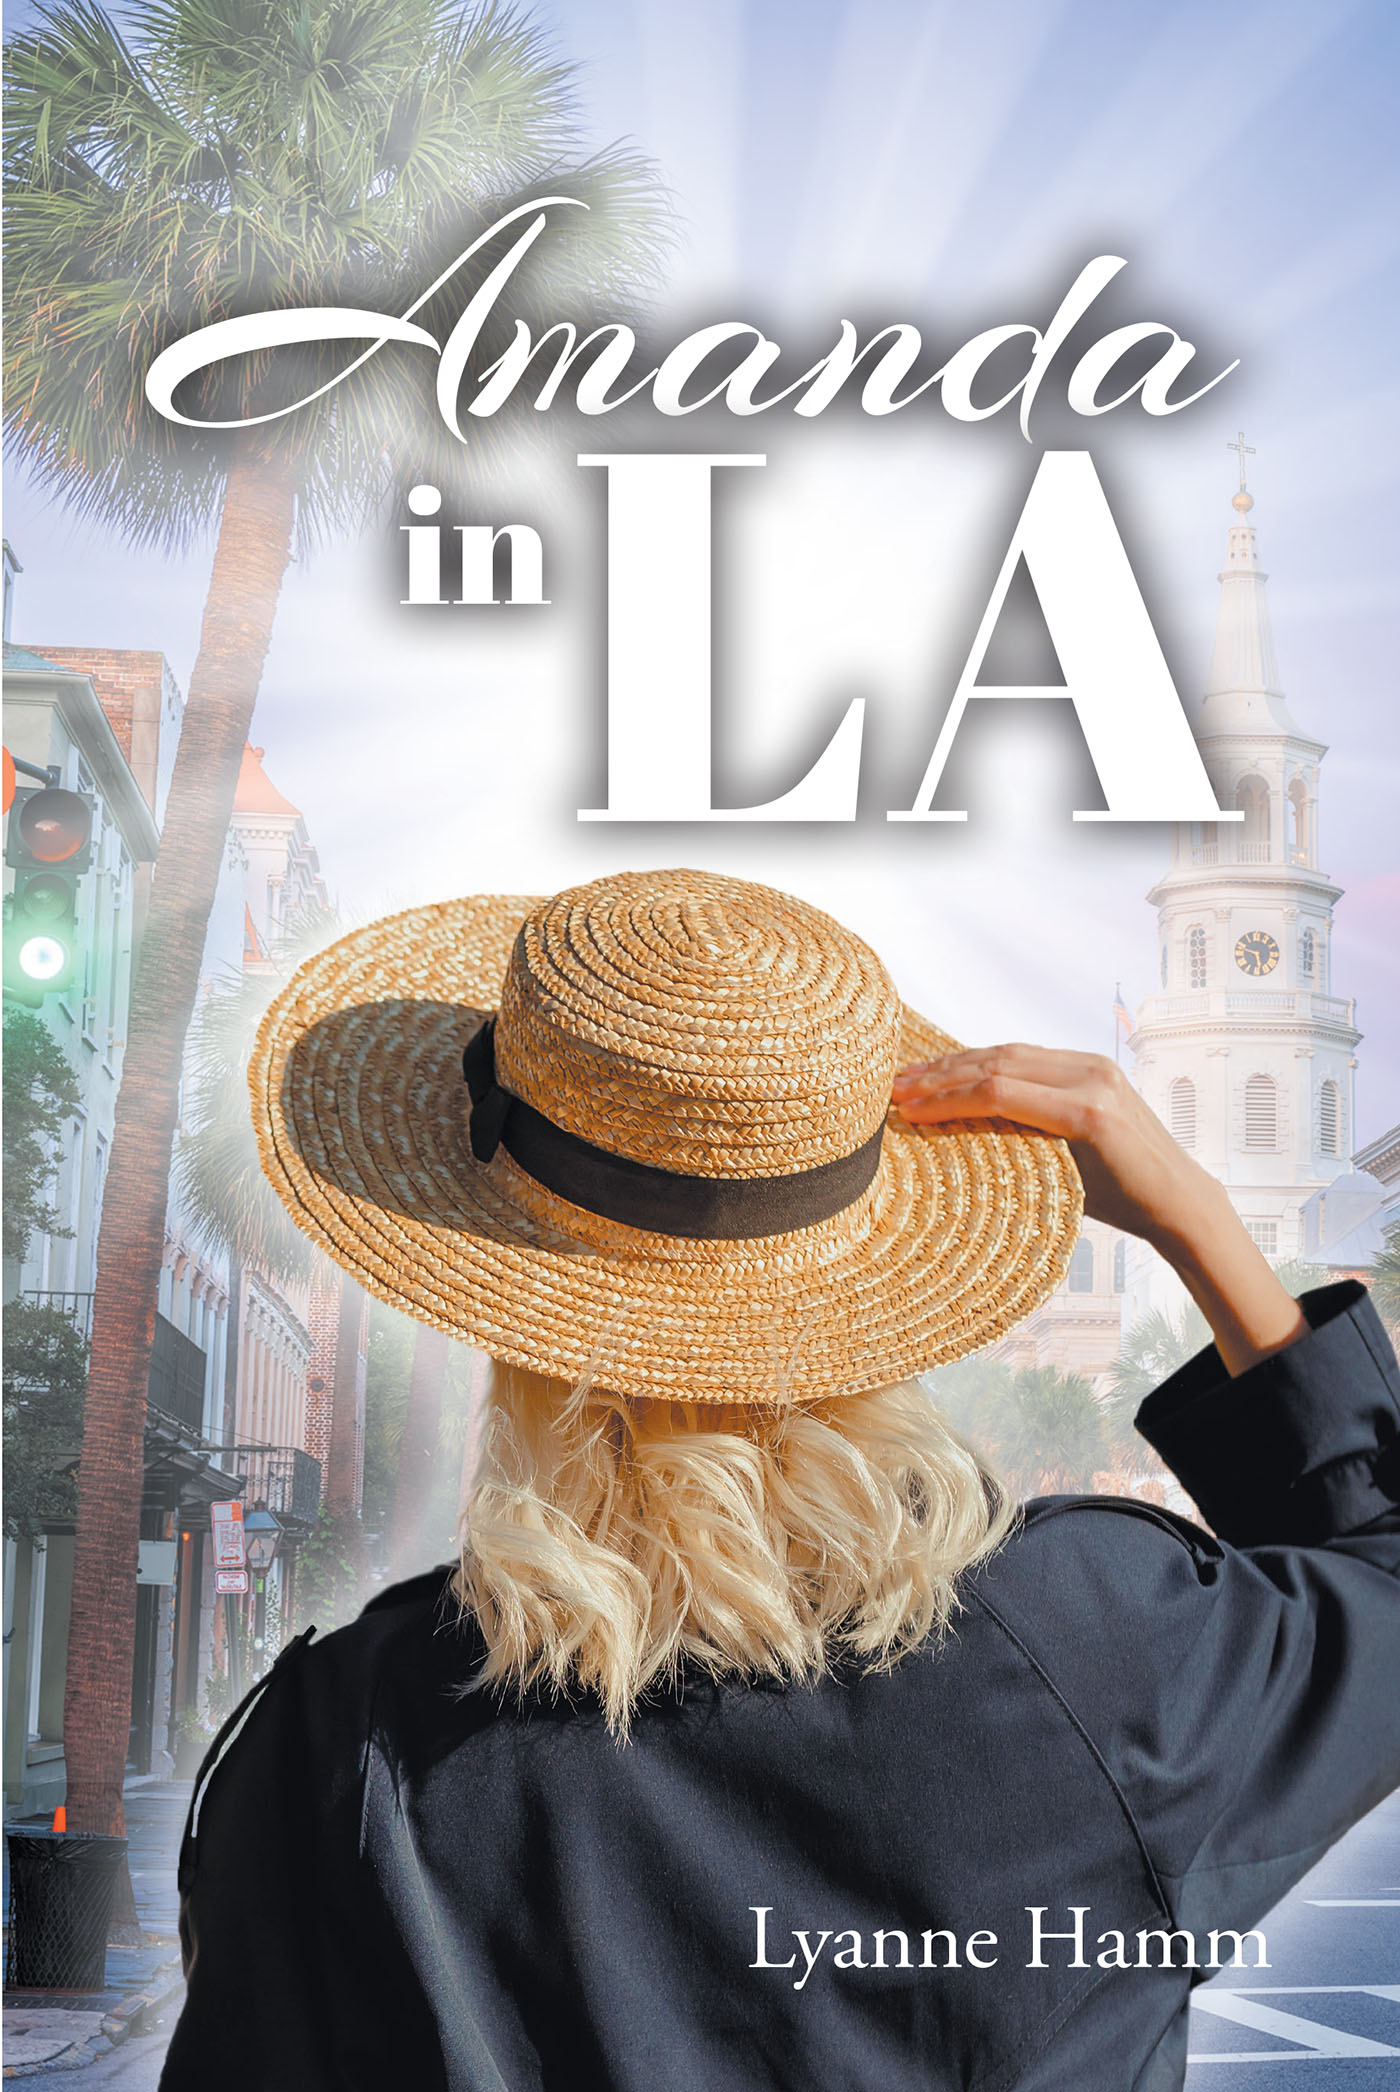 Lyanne Hamm’s Newly Released "Amanda in LA" is an Action-Packed Tale of Self-Discovery with a Twist of Unexpected Danger